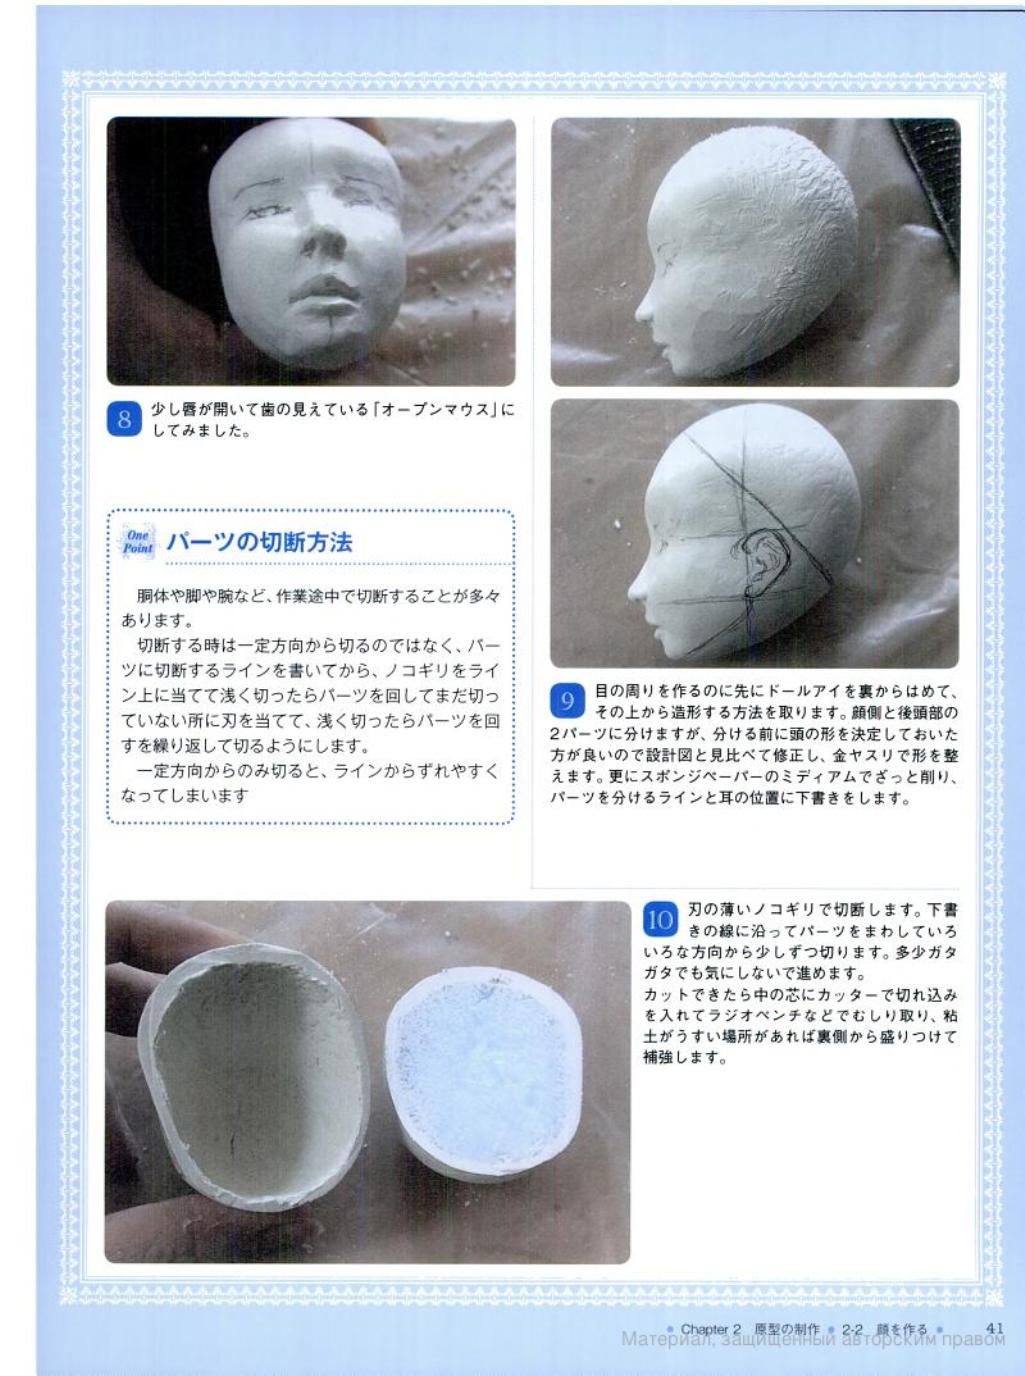 Ball Jointed Doll Making Guide